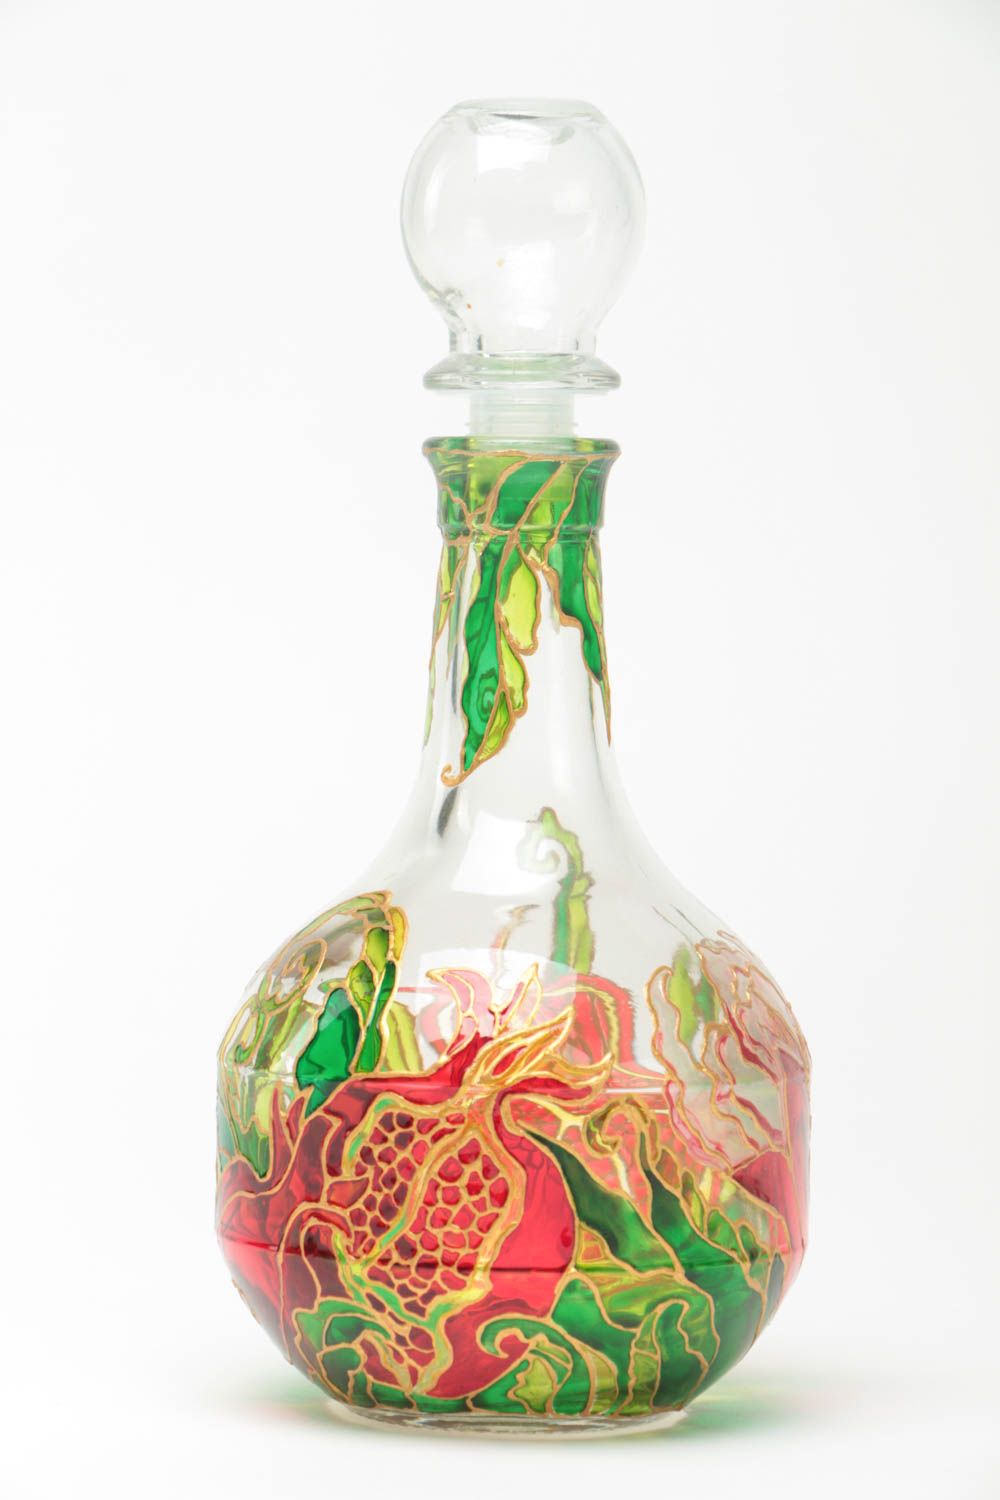 15 oz clear glass wine carafe with hand-painted floral pattern 1 lb photo 2